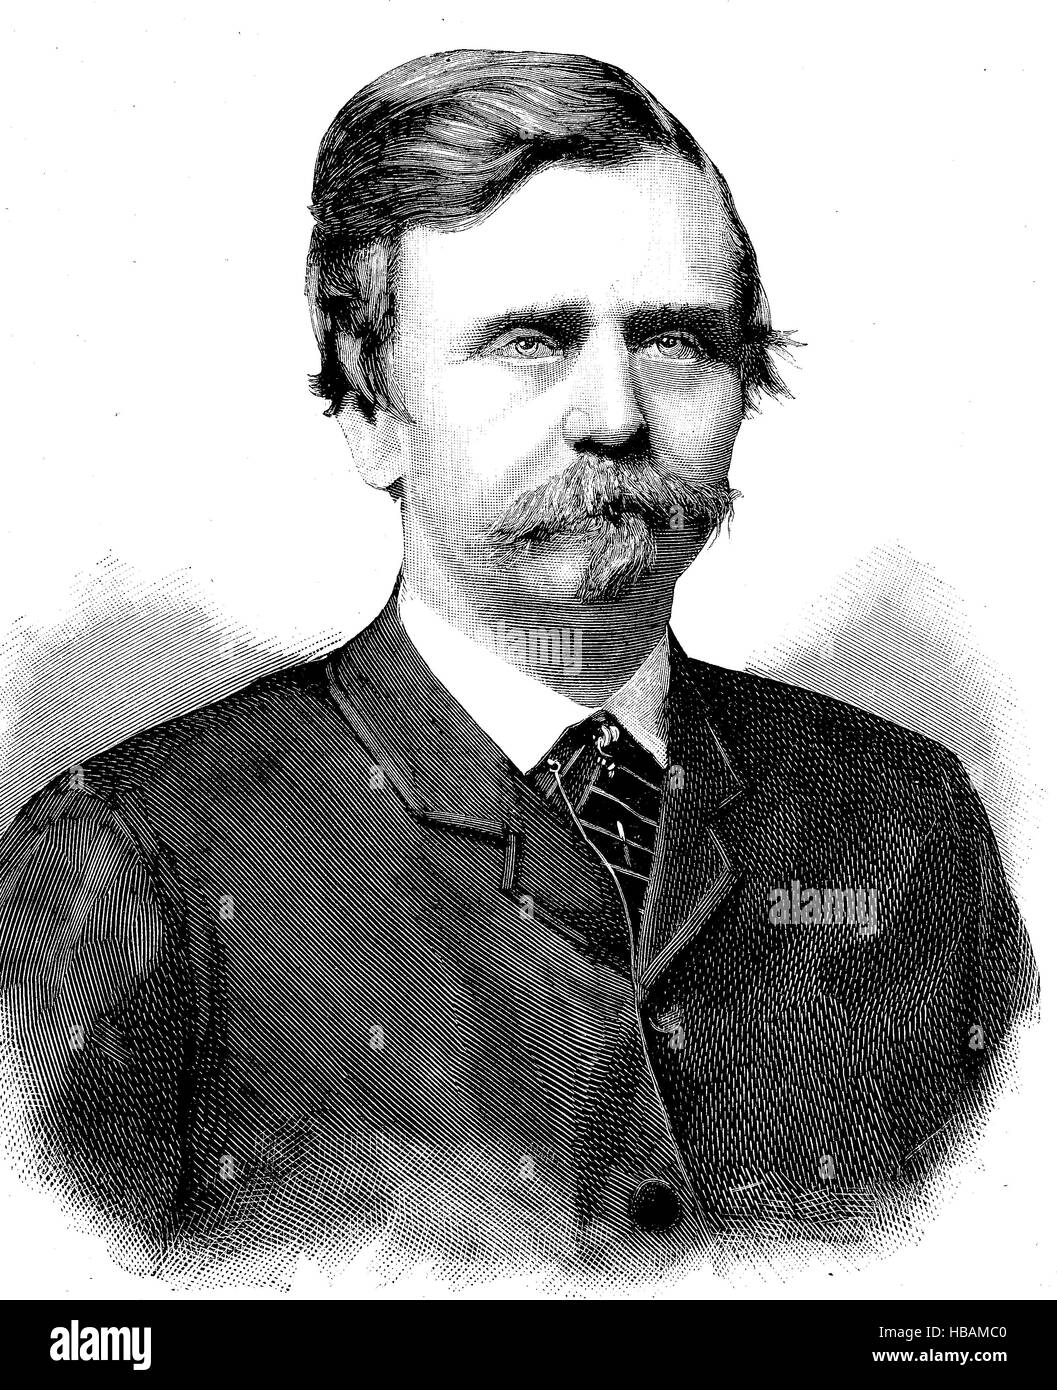 Count Gyula Szapary de Szapar, Muraszombat et Szechy-Sziget, 1 November 1832 - 20 January 1905, was a Hungarian politician who served as Prime Minister of Hungary from 1890 to 1892, hictorical illustration from 1880 Stock Photo